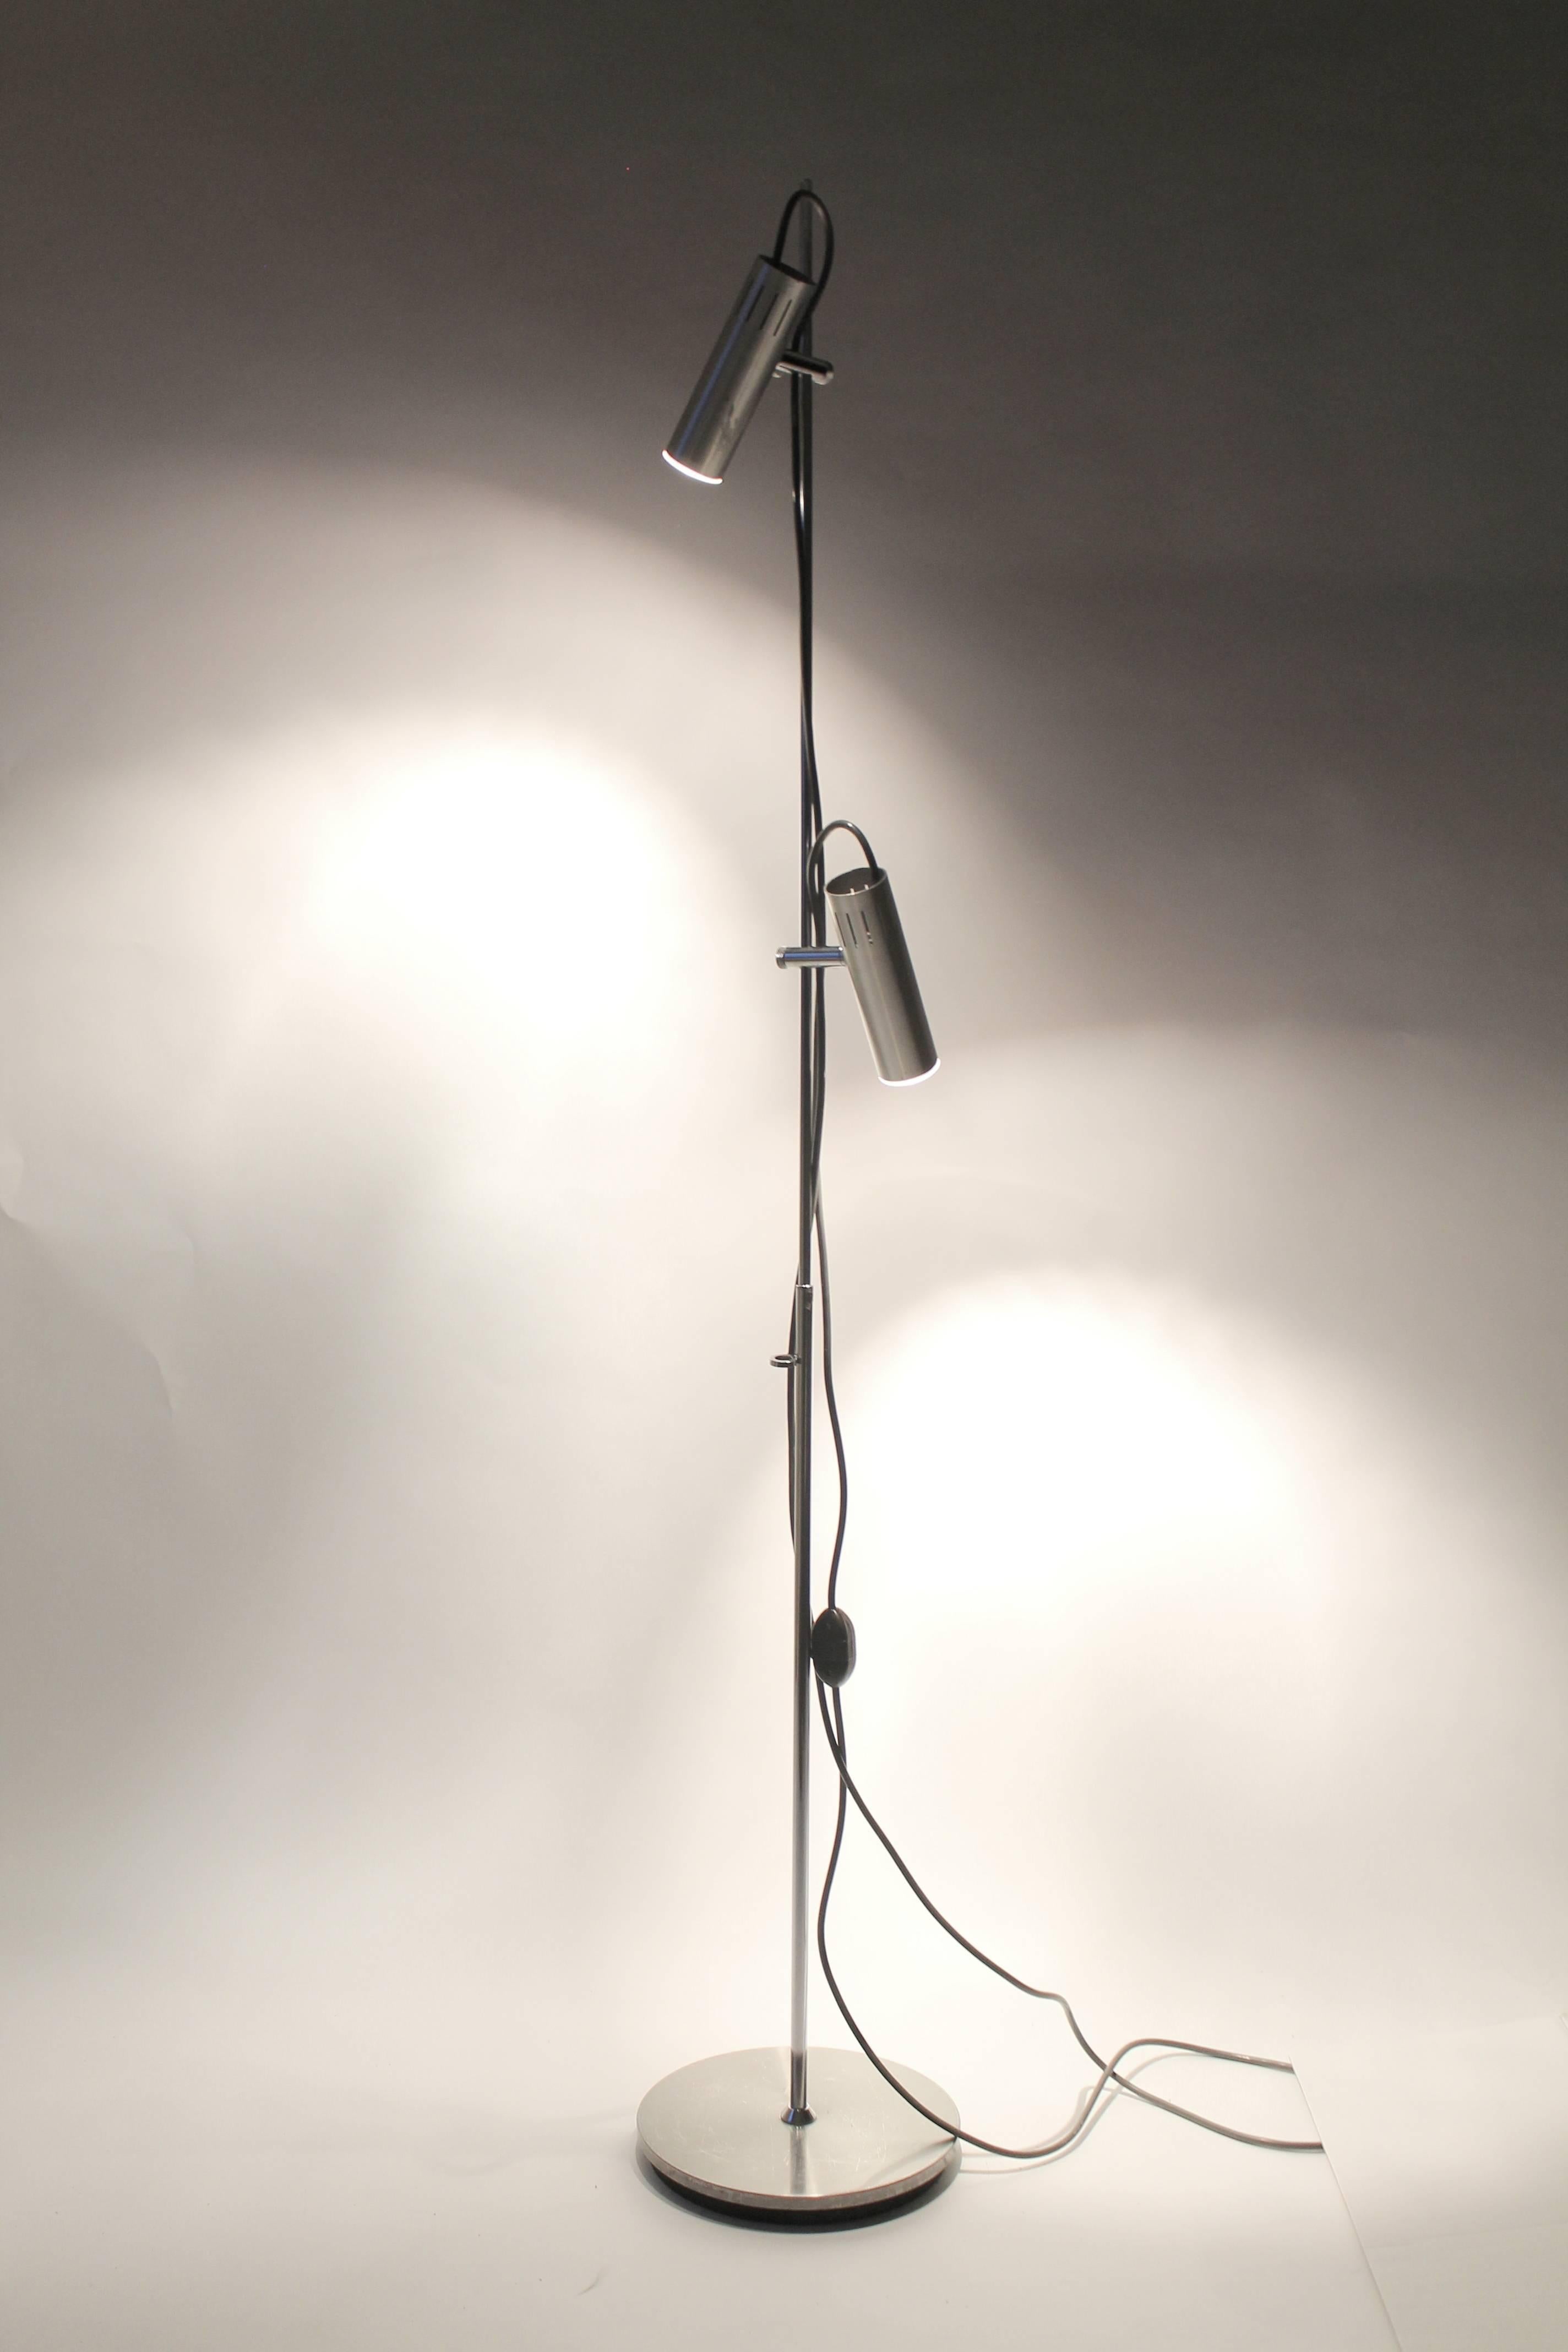 Iconic Minimalist Mid-Century floor lamp from france.

Lacquered aluminium shade that lock firmly in any selected position. They also have a unique feature, the electrical socket slide up and down inside the shade to adapt to any E26 light bulbs